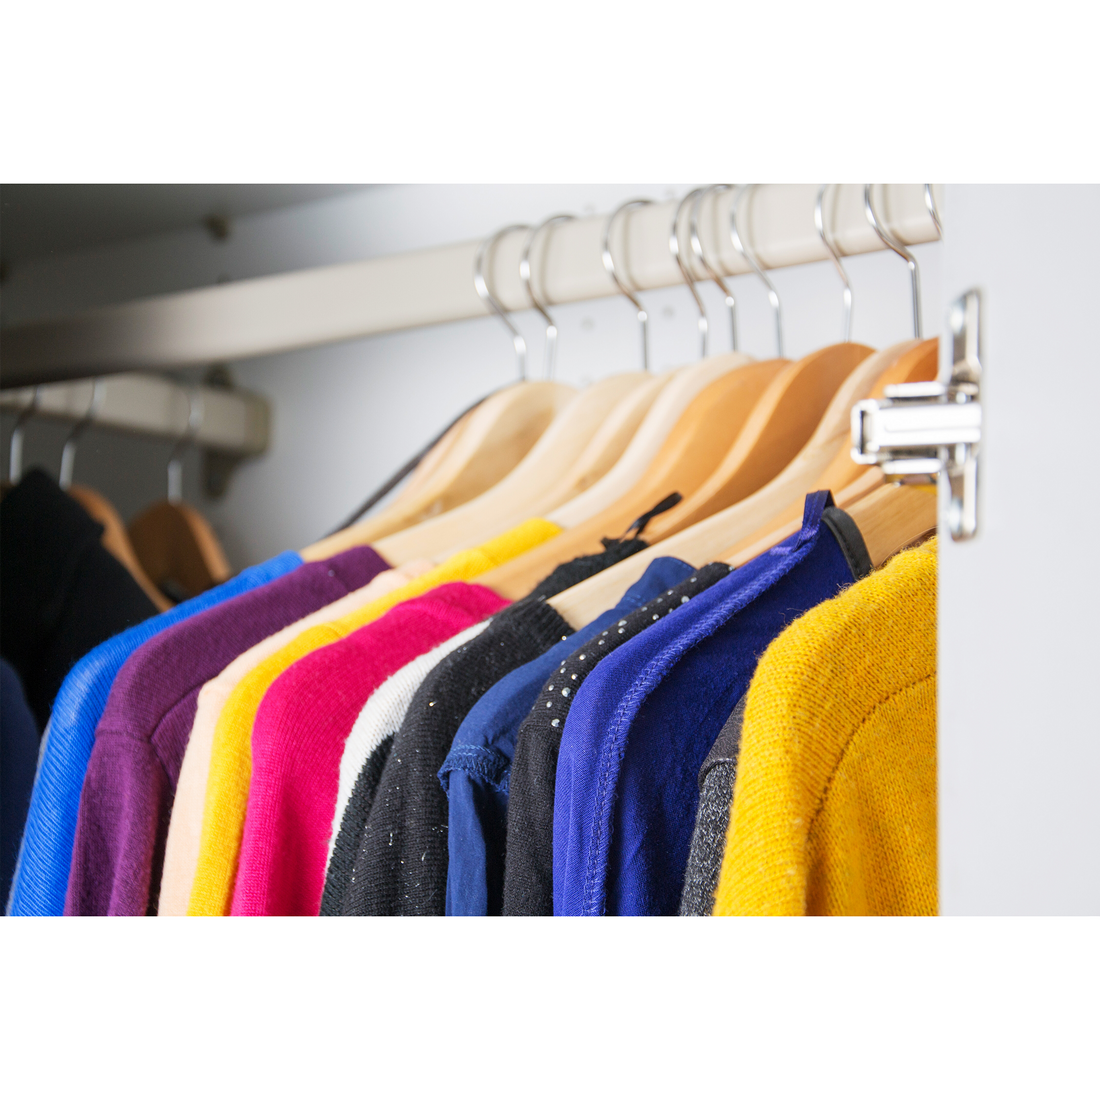 How To Uplift Your Wardrobe Affordably by SommerSparkle